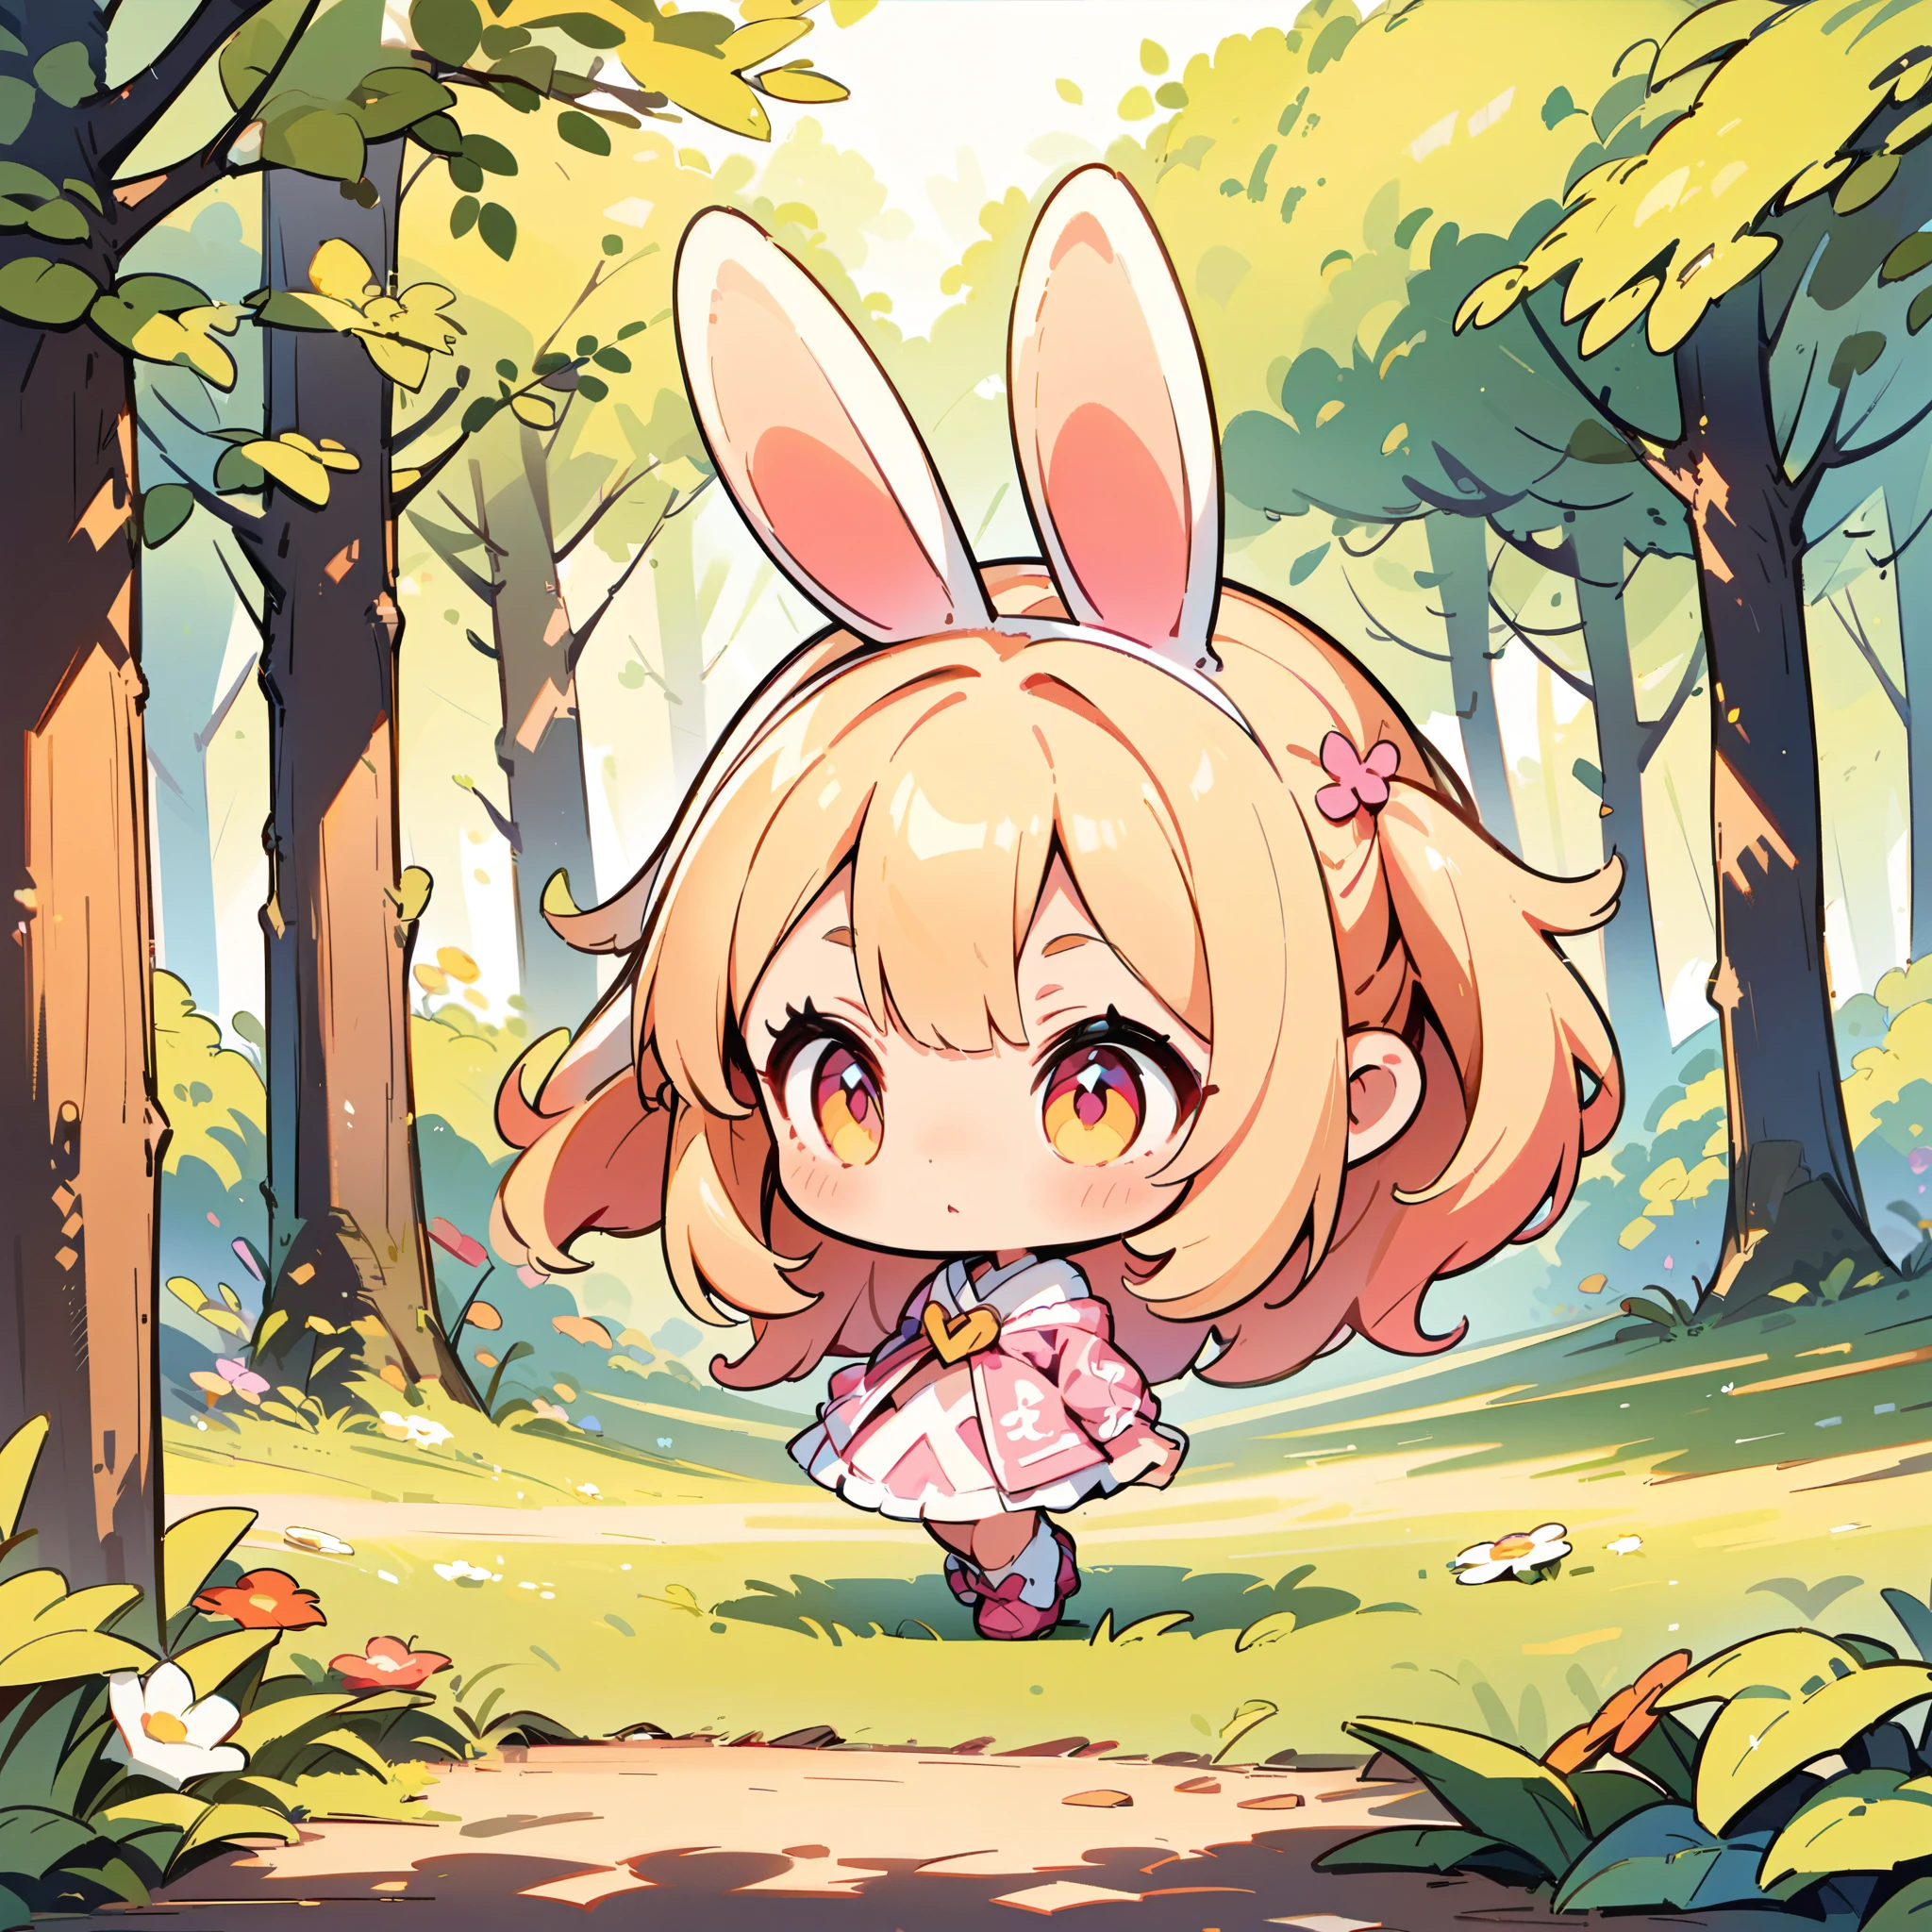 A rabbit-like person, Cute bunny woman, alone, Little, Deformation, 2 heads, Full body view, Focus on the ears, Forest and spring background, Hand-drawn illustrations.